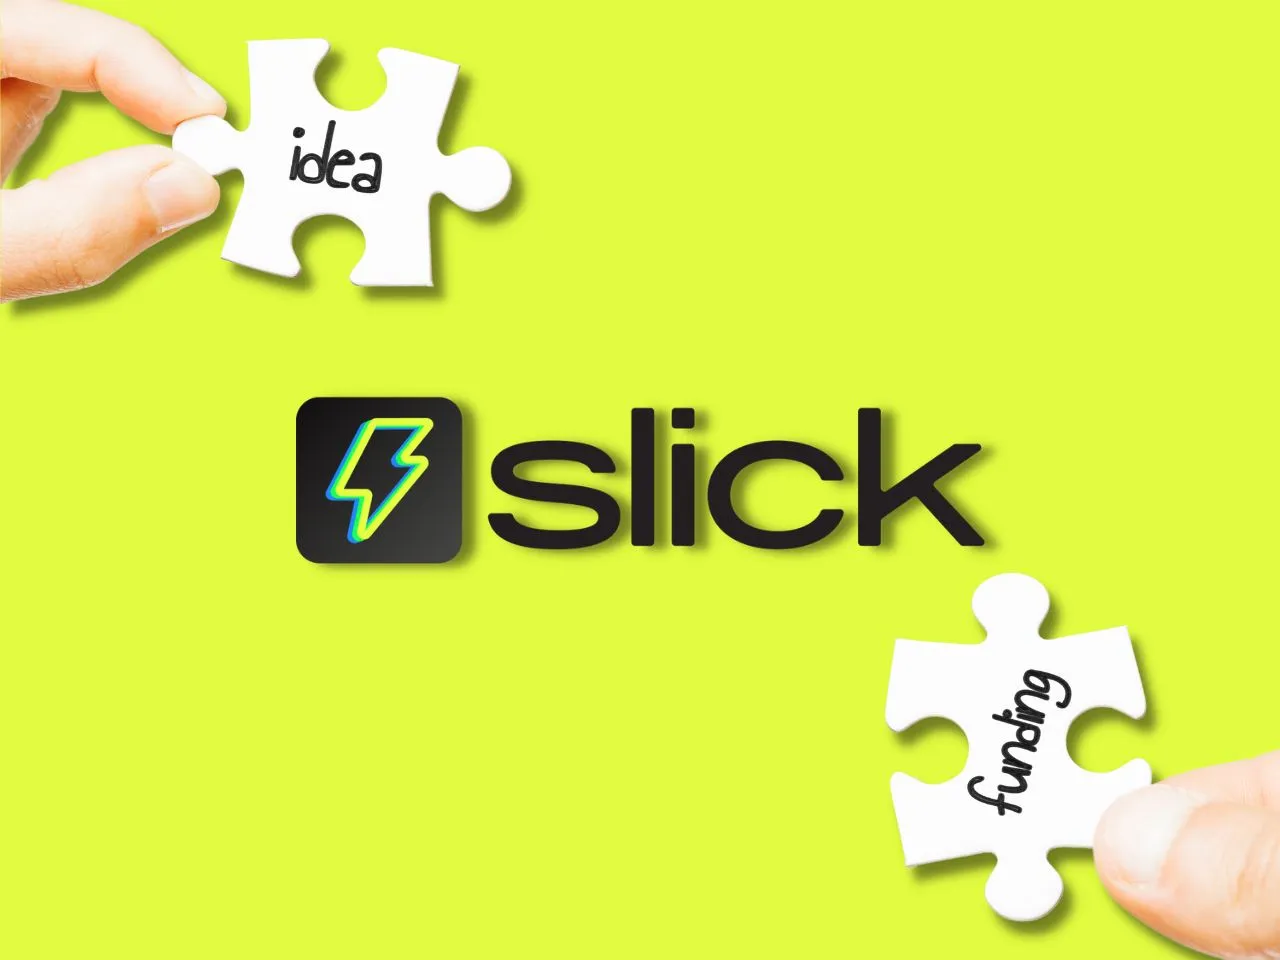 Social Networking Startup Slick Raises $1.6M in Seed Funding Round